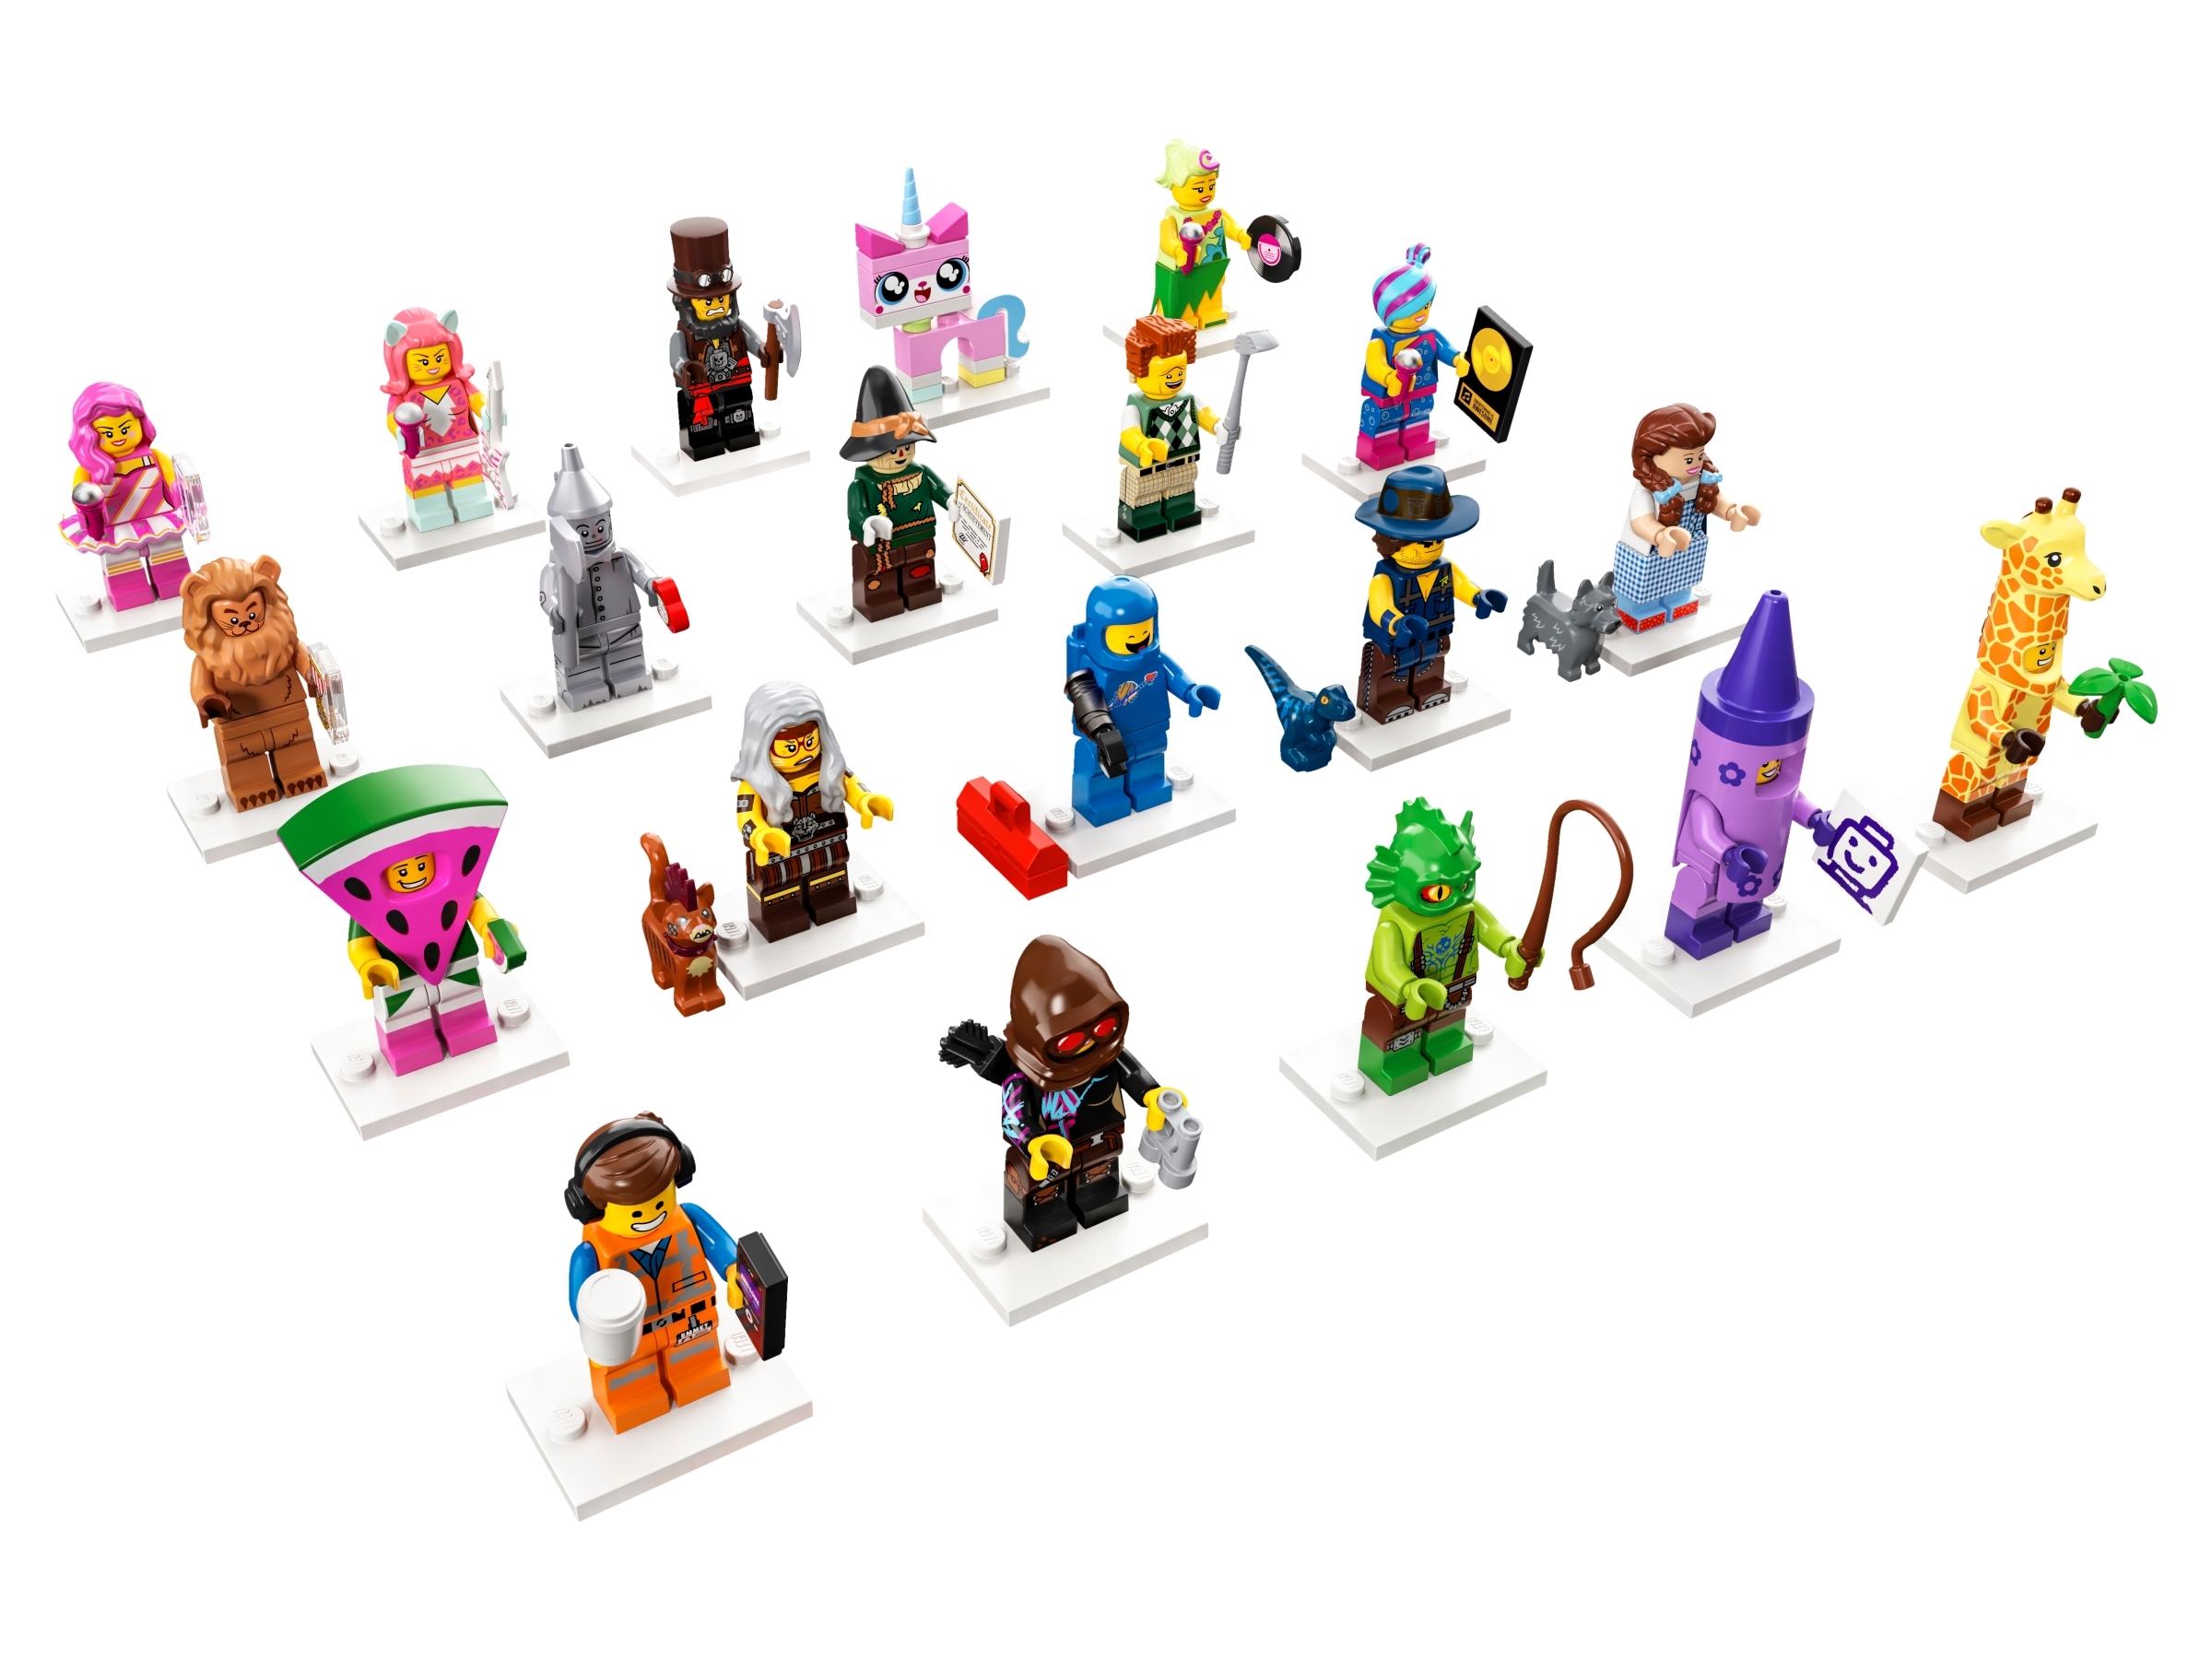 Original LEGO Friends Limited Edition polybag minifigure set Pick yours!